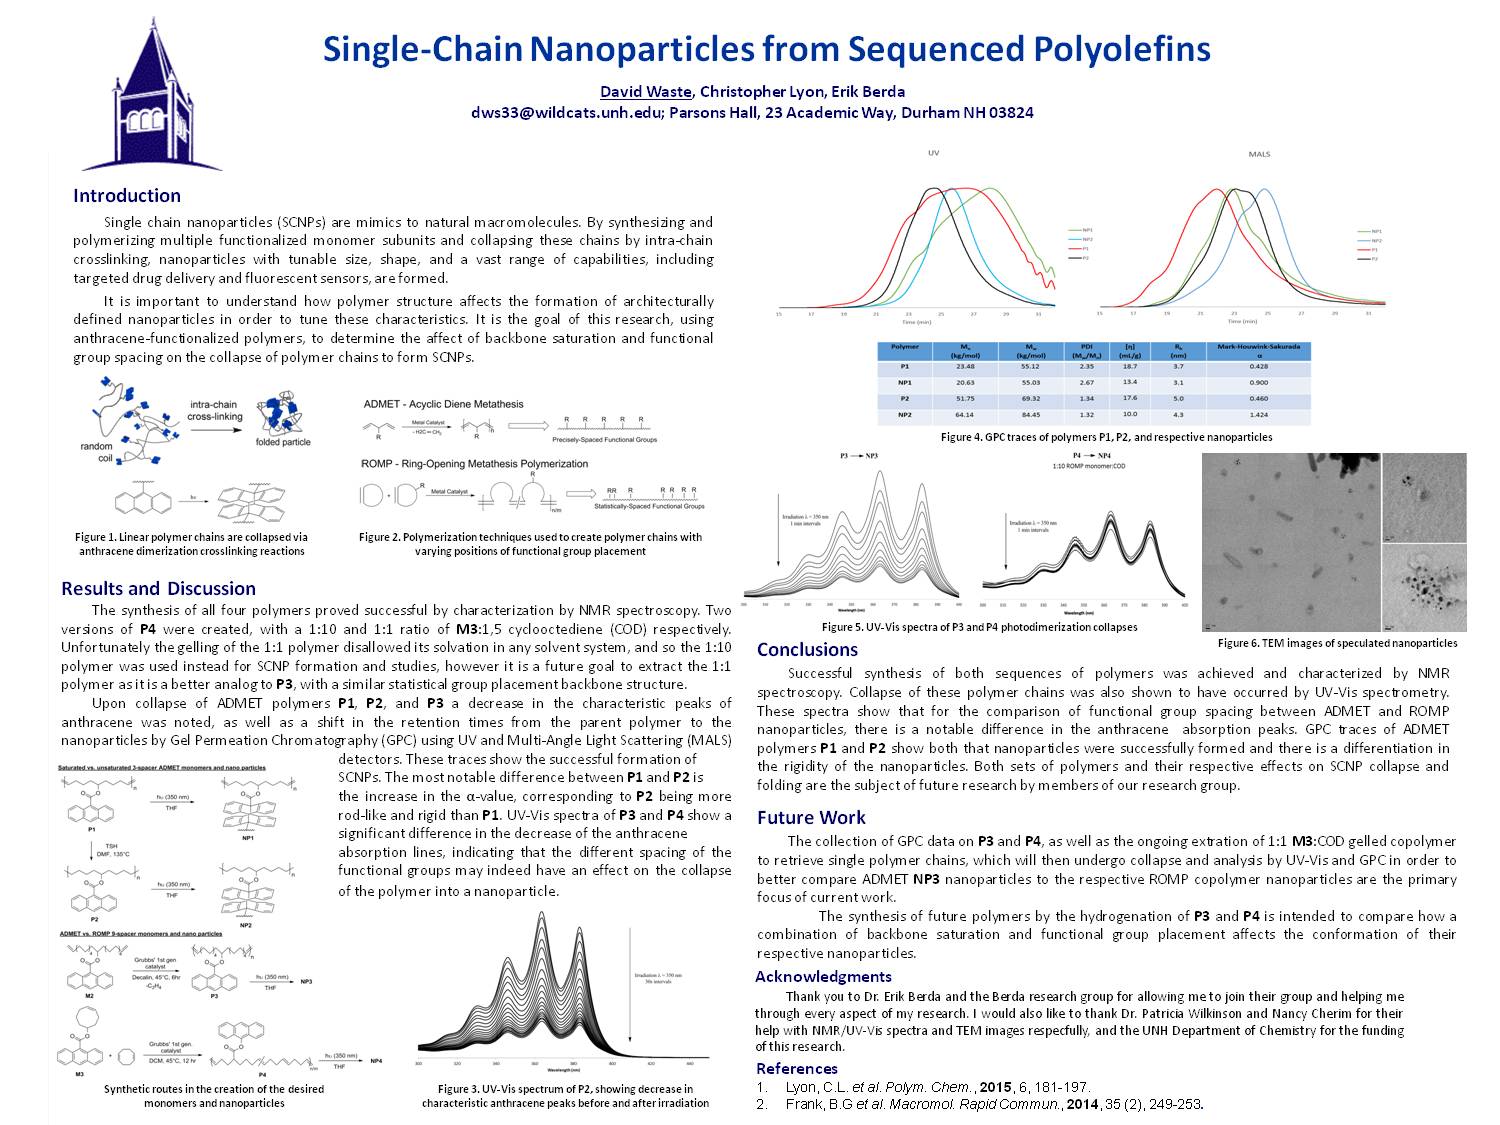 Single-Chain Nanoparticles From Sequenced Polyolefins by dws33